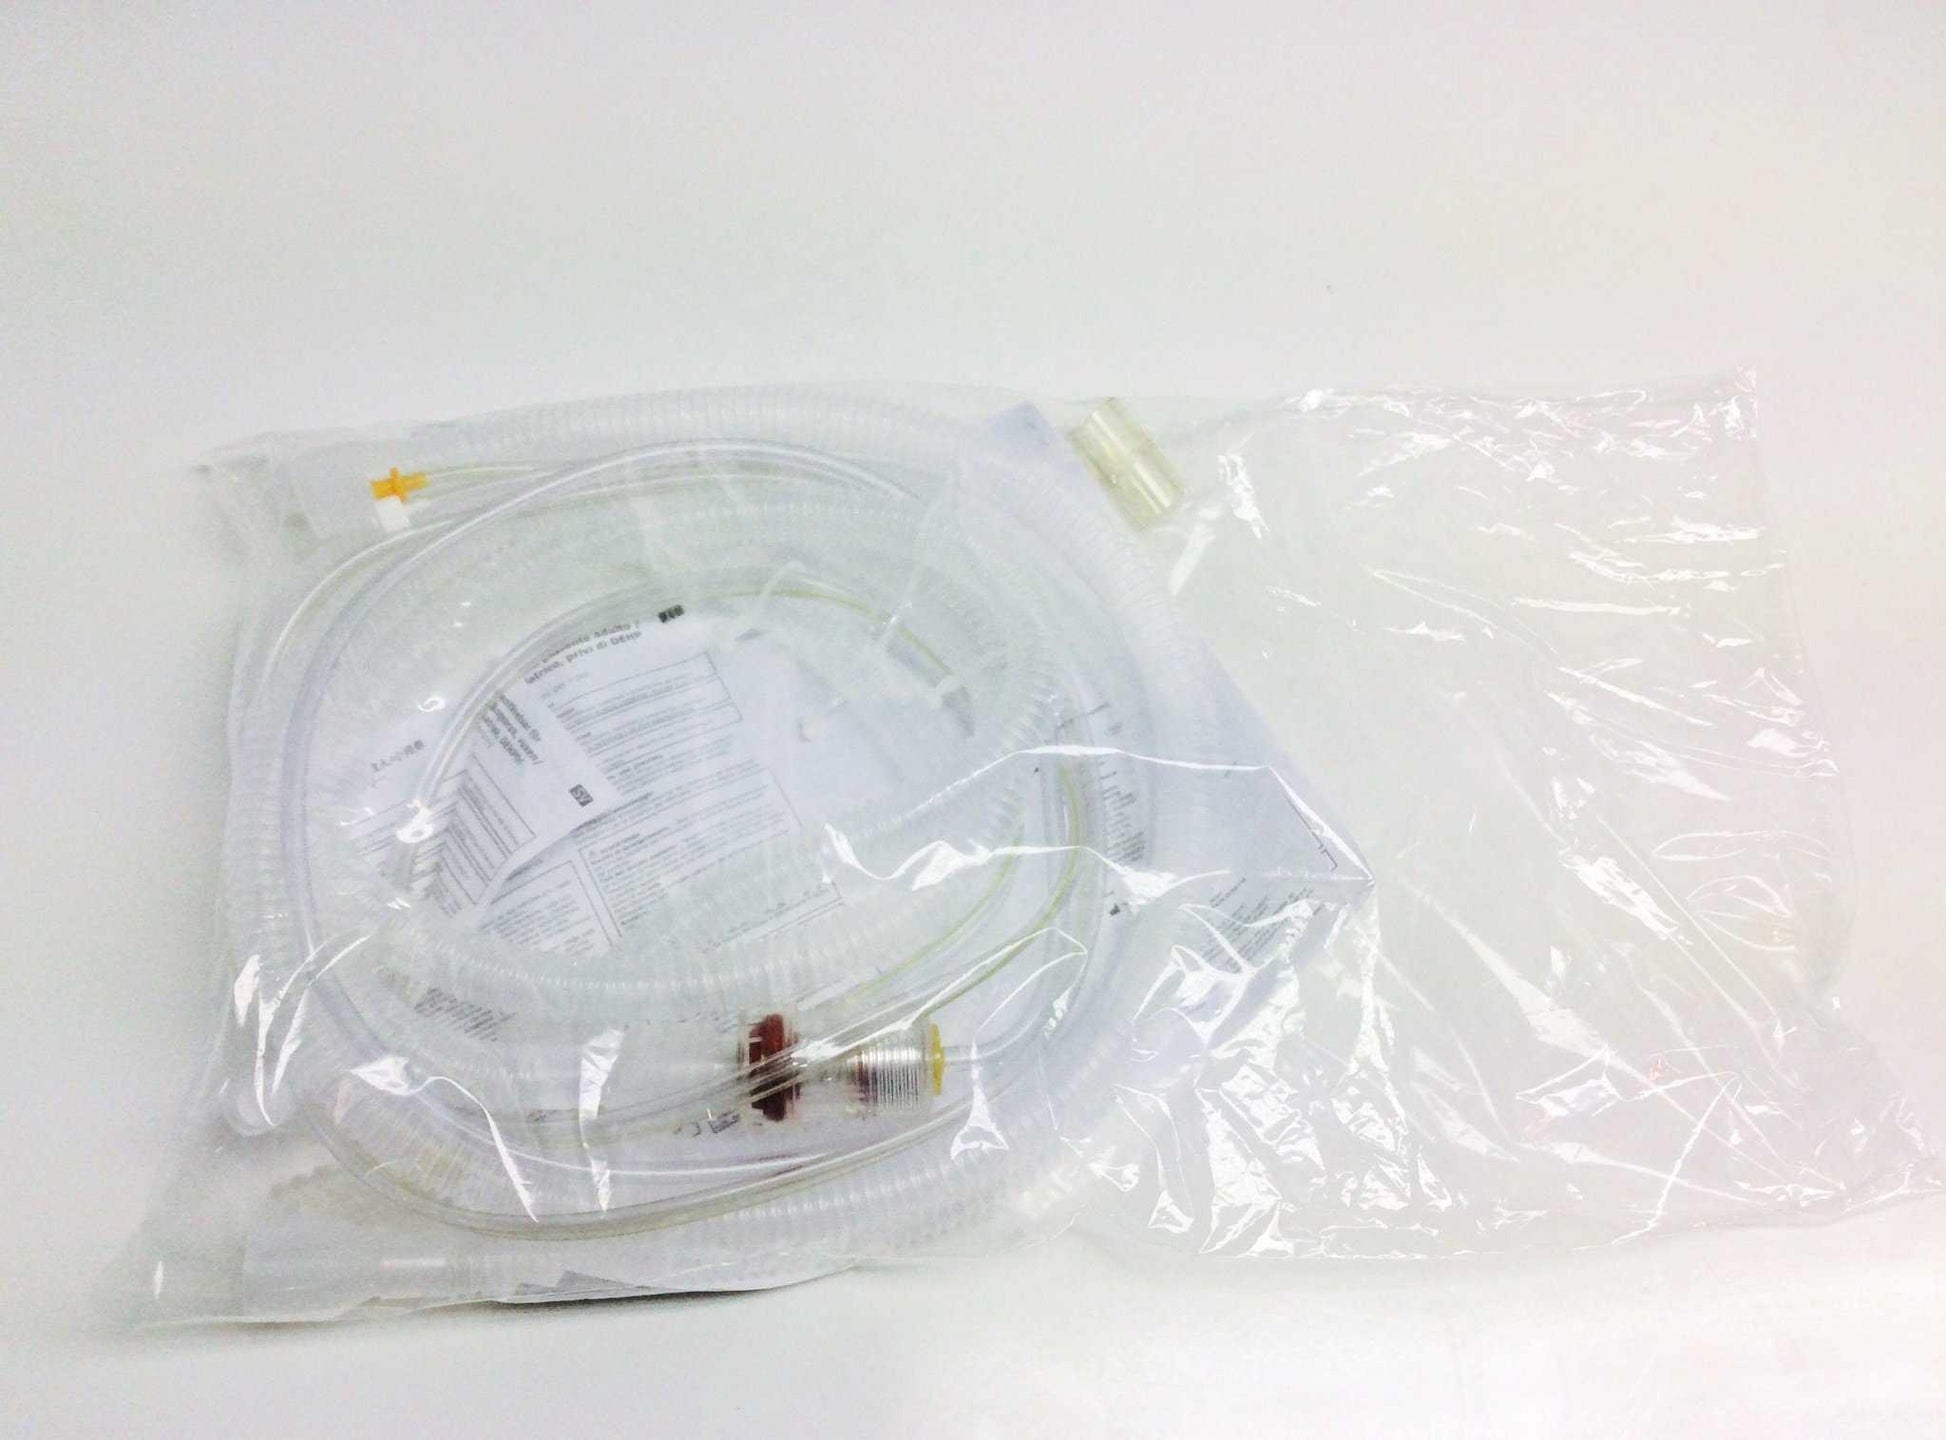 NEW CareFusion Patient Circuits with PEEP 15 mm, SPU 29710-001 10821X10 1168902 FREE Shipping - MBR Medicals